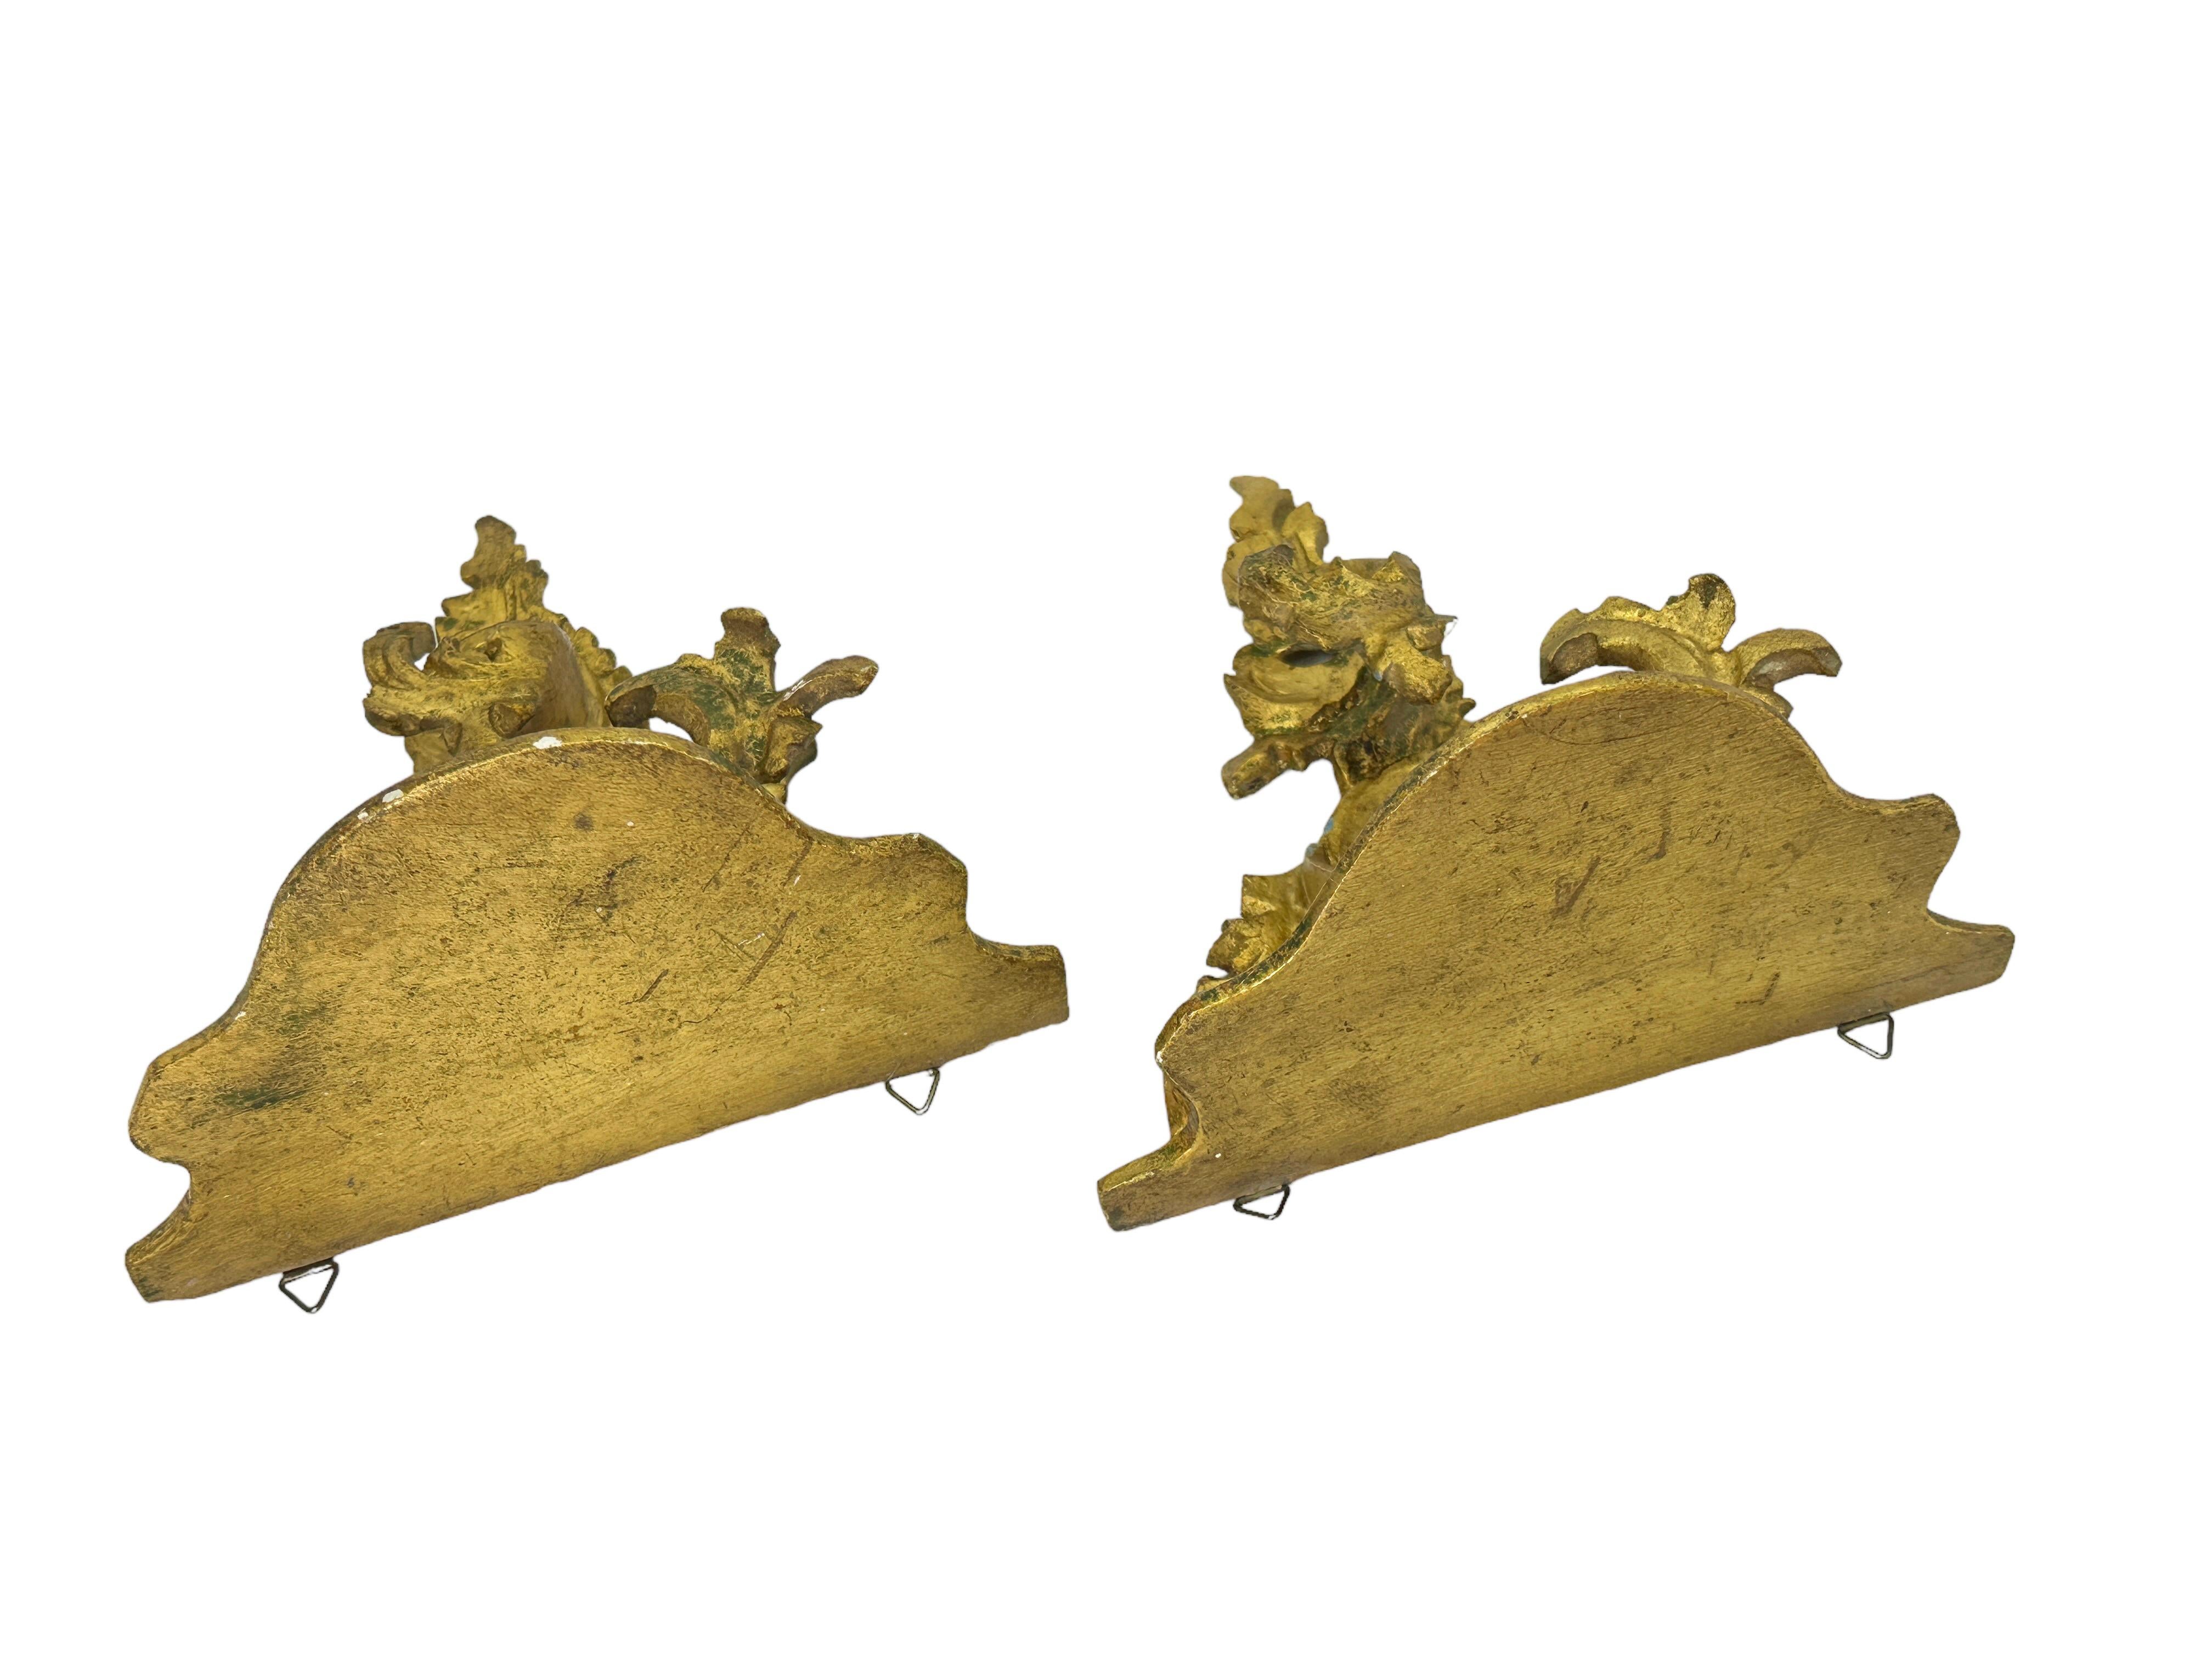 Pair of Italian Old Venetian Wall Shelf, Gilded Carved Acanthus, Rococo Style For Sale 3